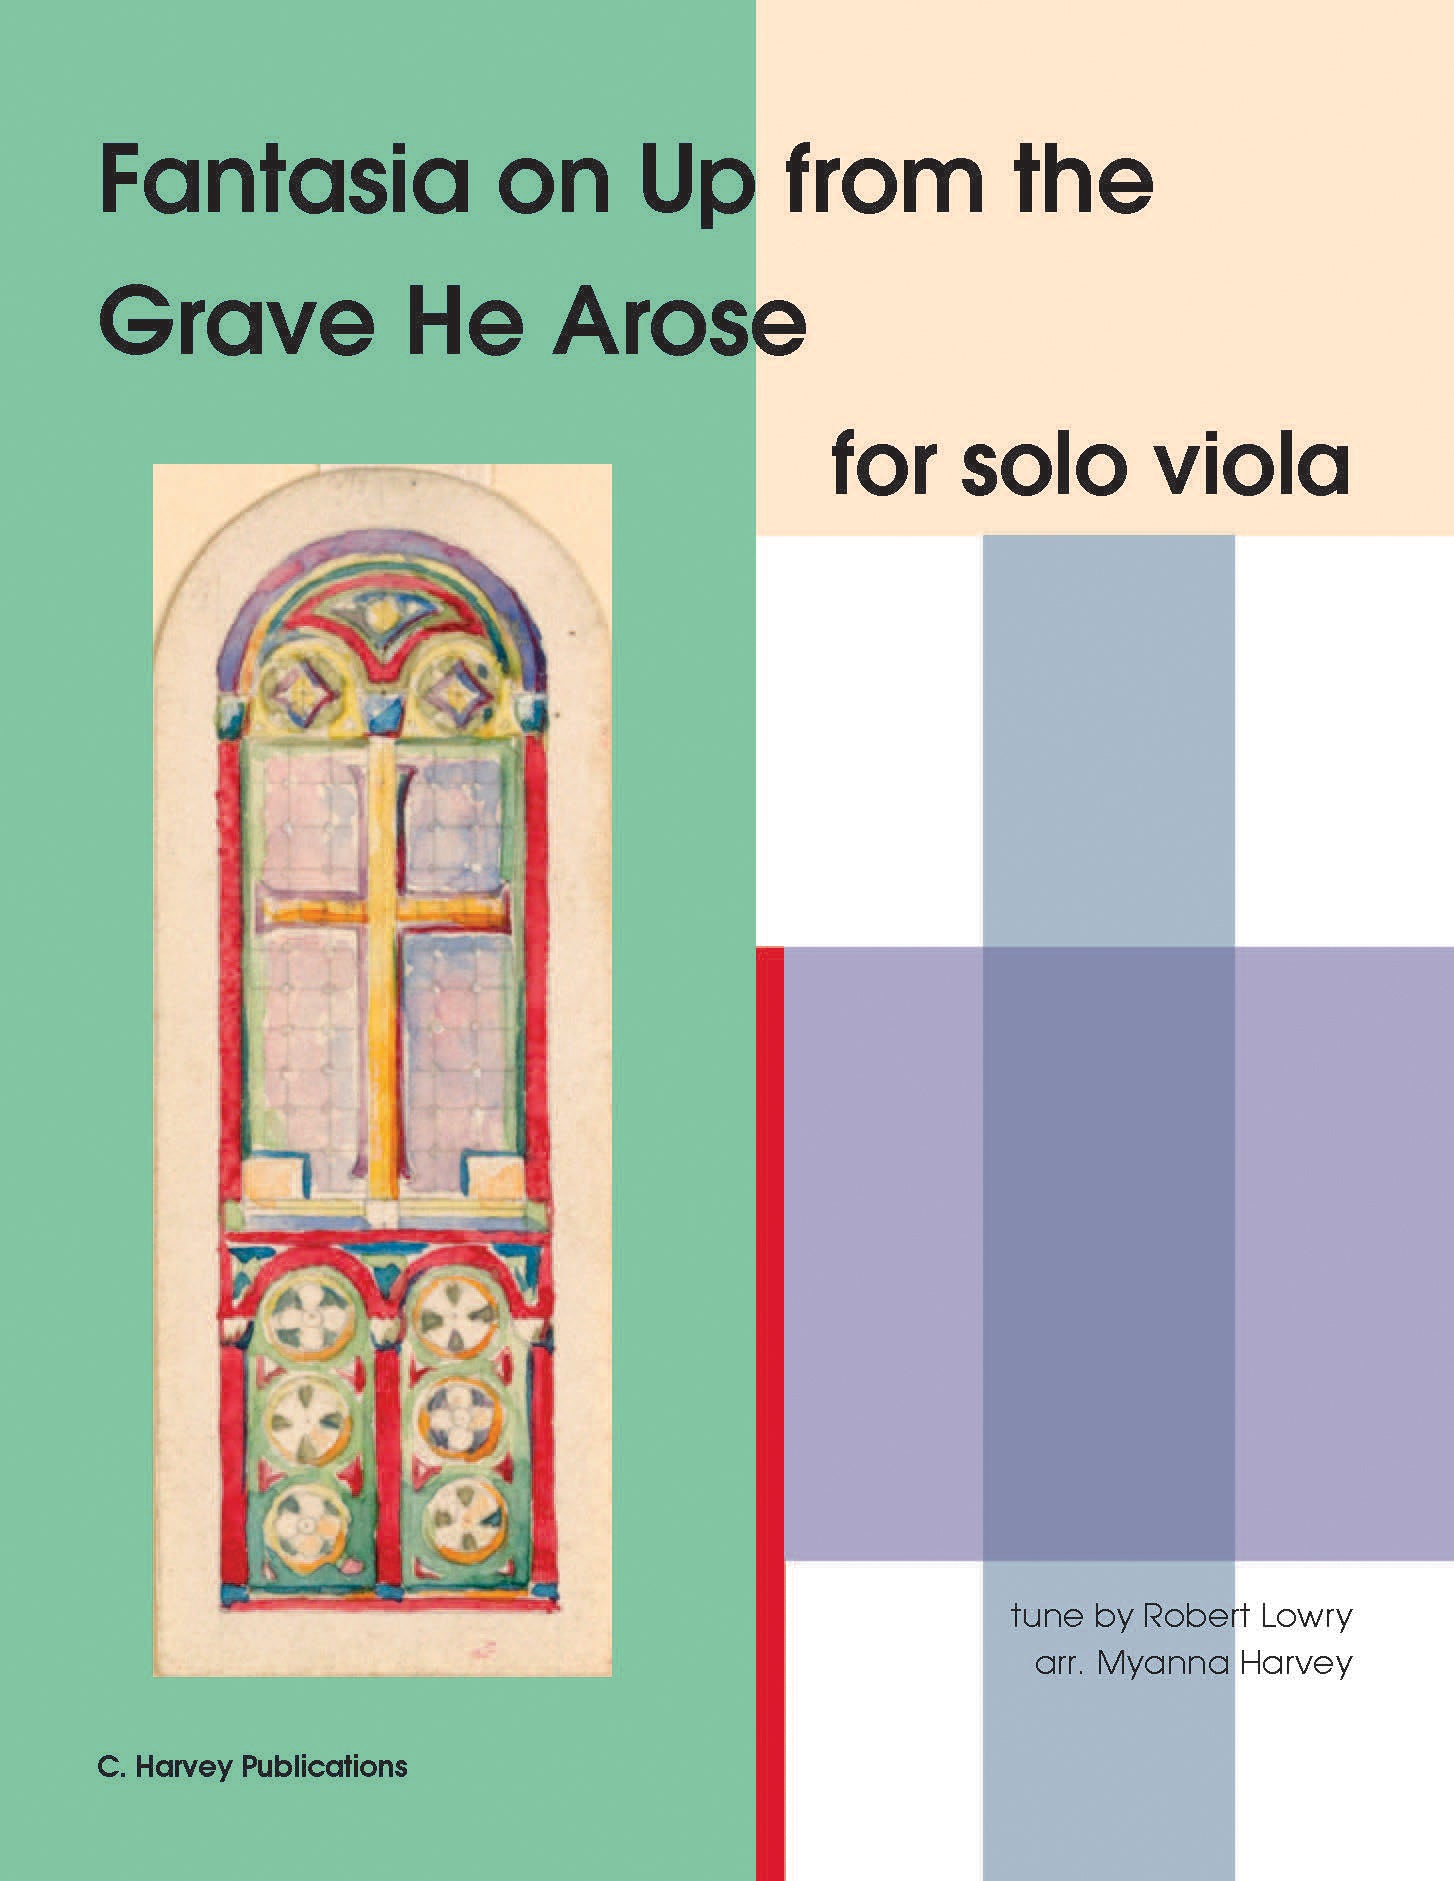 Fantasia on "Up from the Grave He Arose" for Solo Viola - an Easter Hymn - PDF download